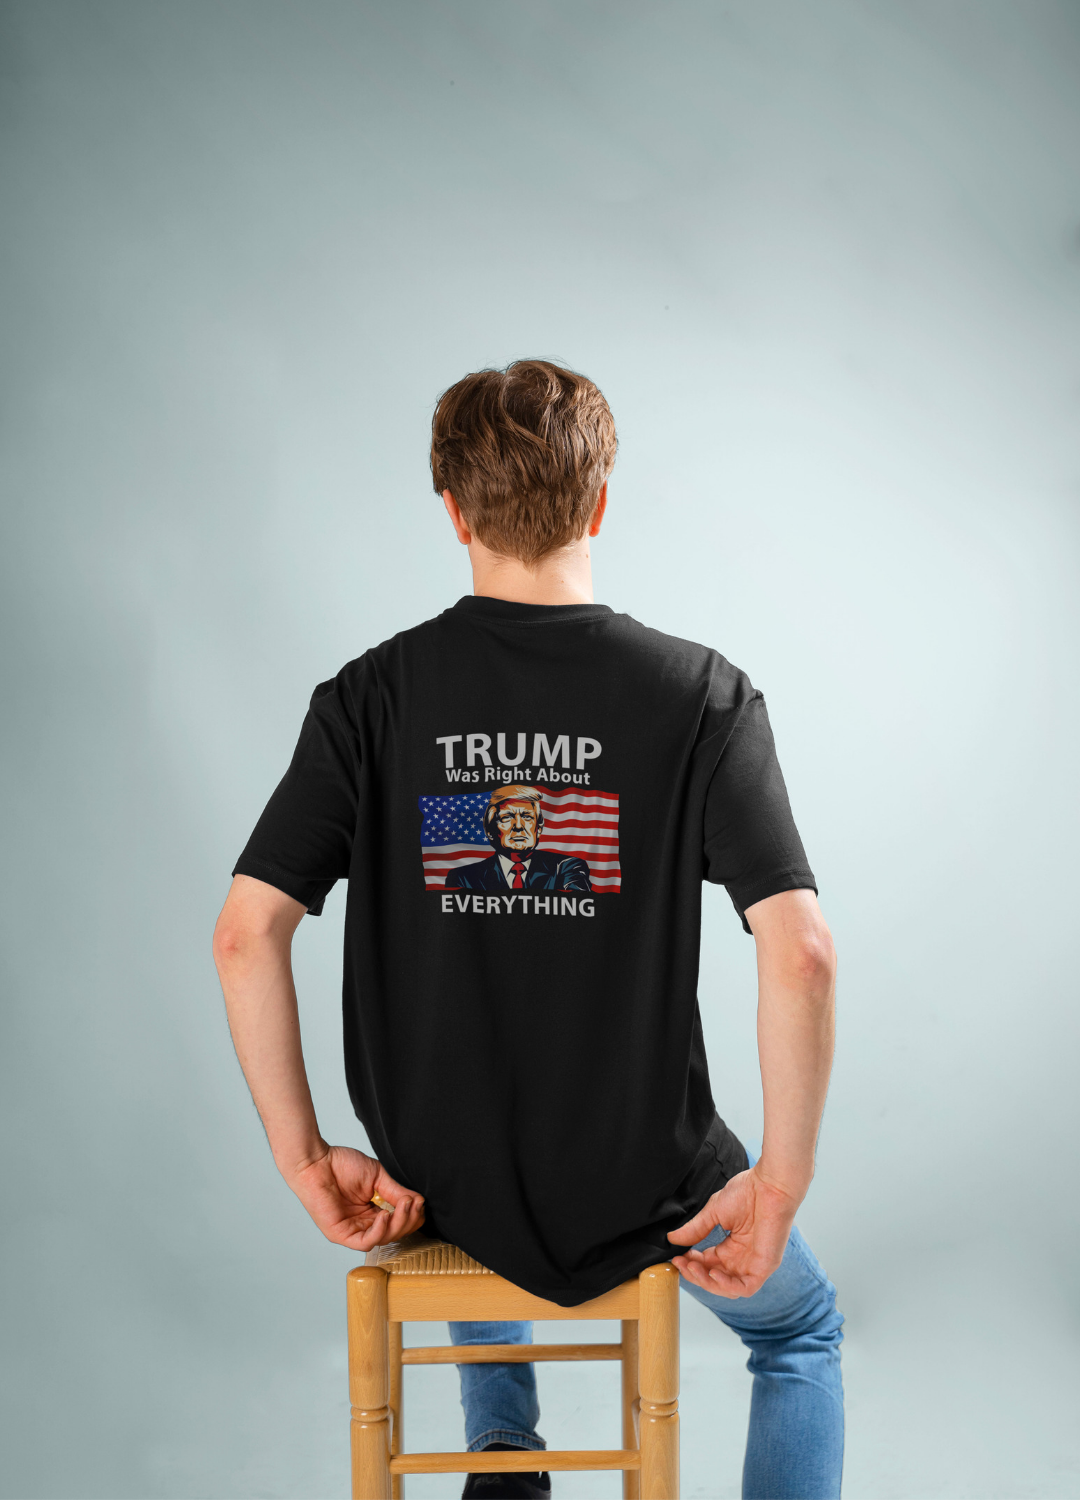 We present you the newest Donald Trump Supporter Collection | Get ready for the 2024 Elections as soon as possible | Express Shipping within the USA